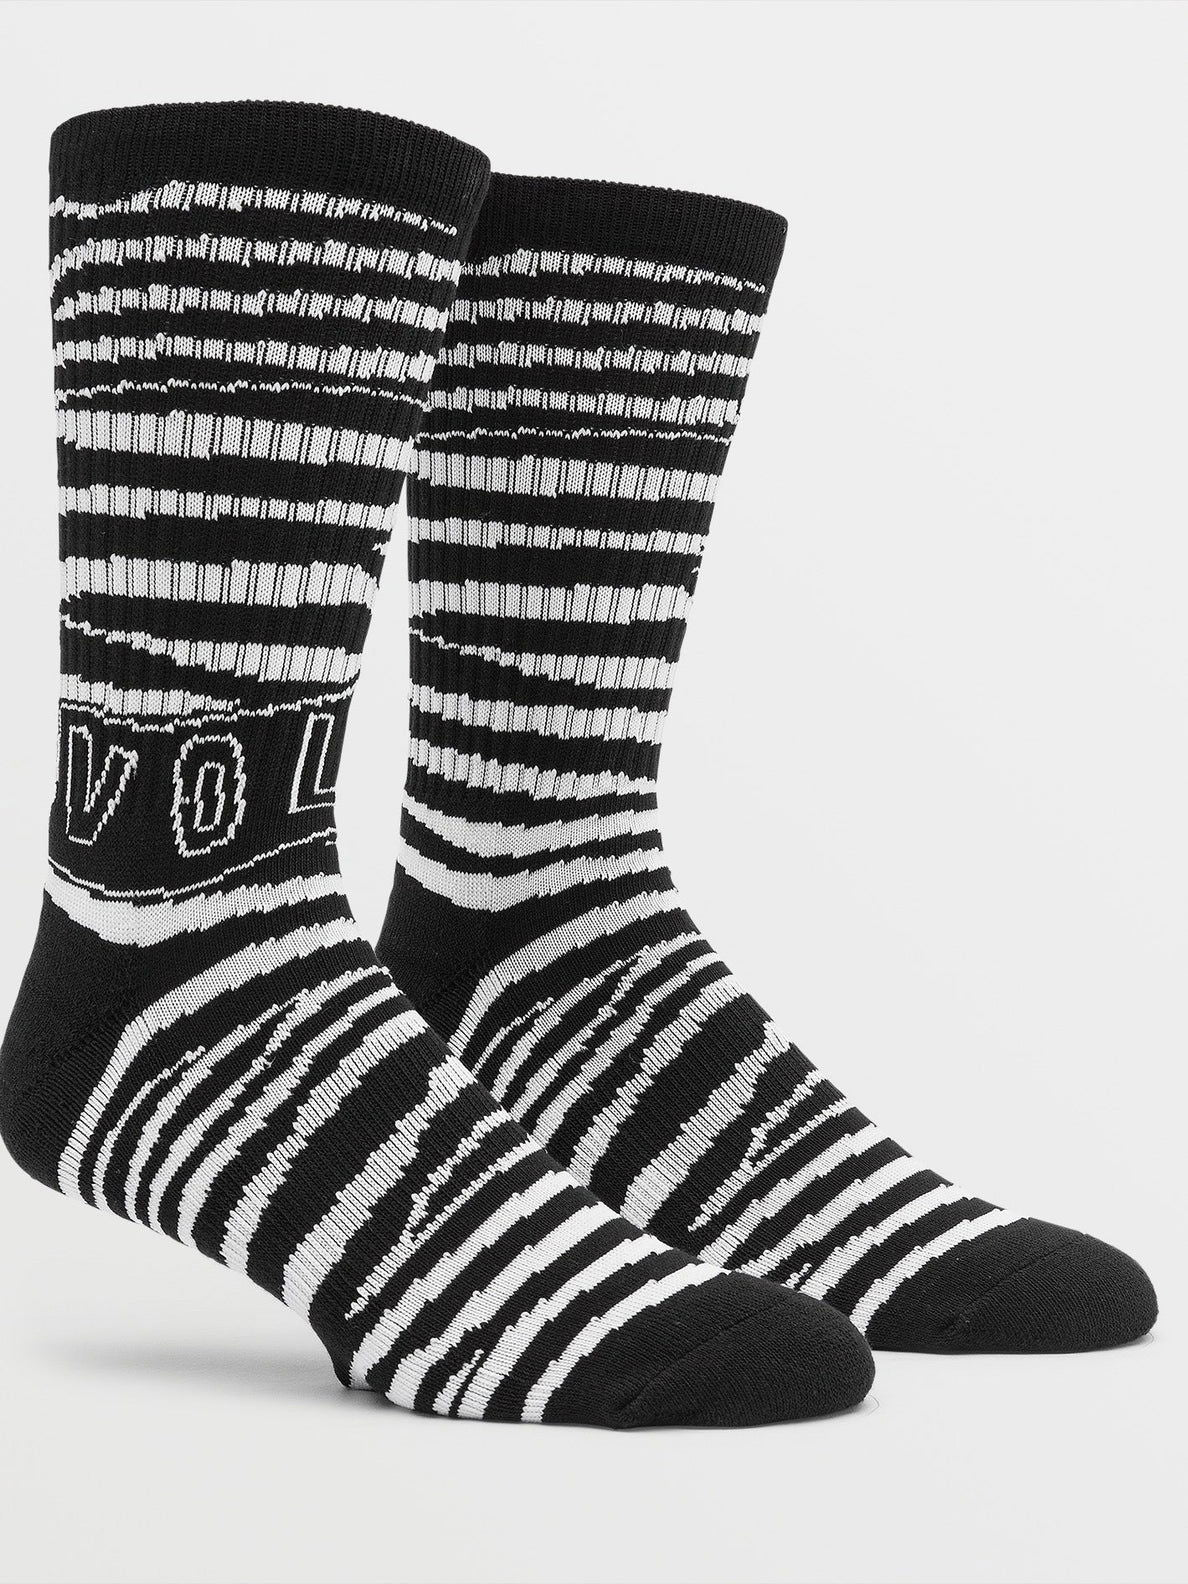 Volcom - Shred Stone Sock | Off White -  - Married to the Sea Surf Shop - 